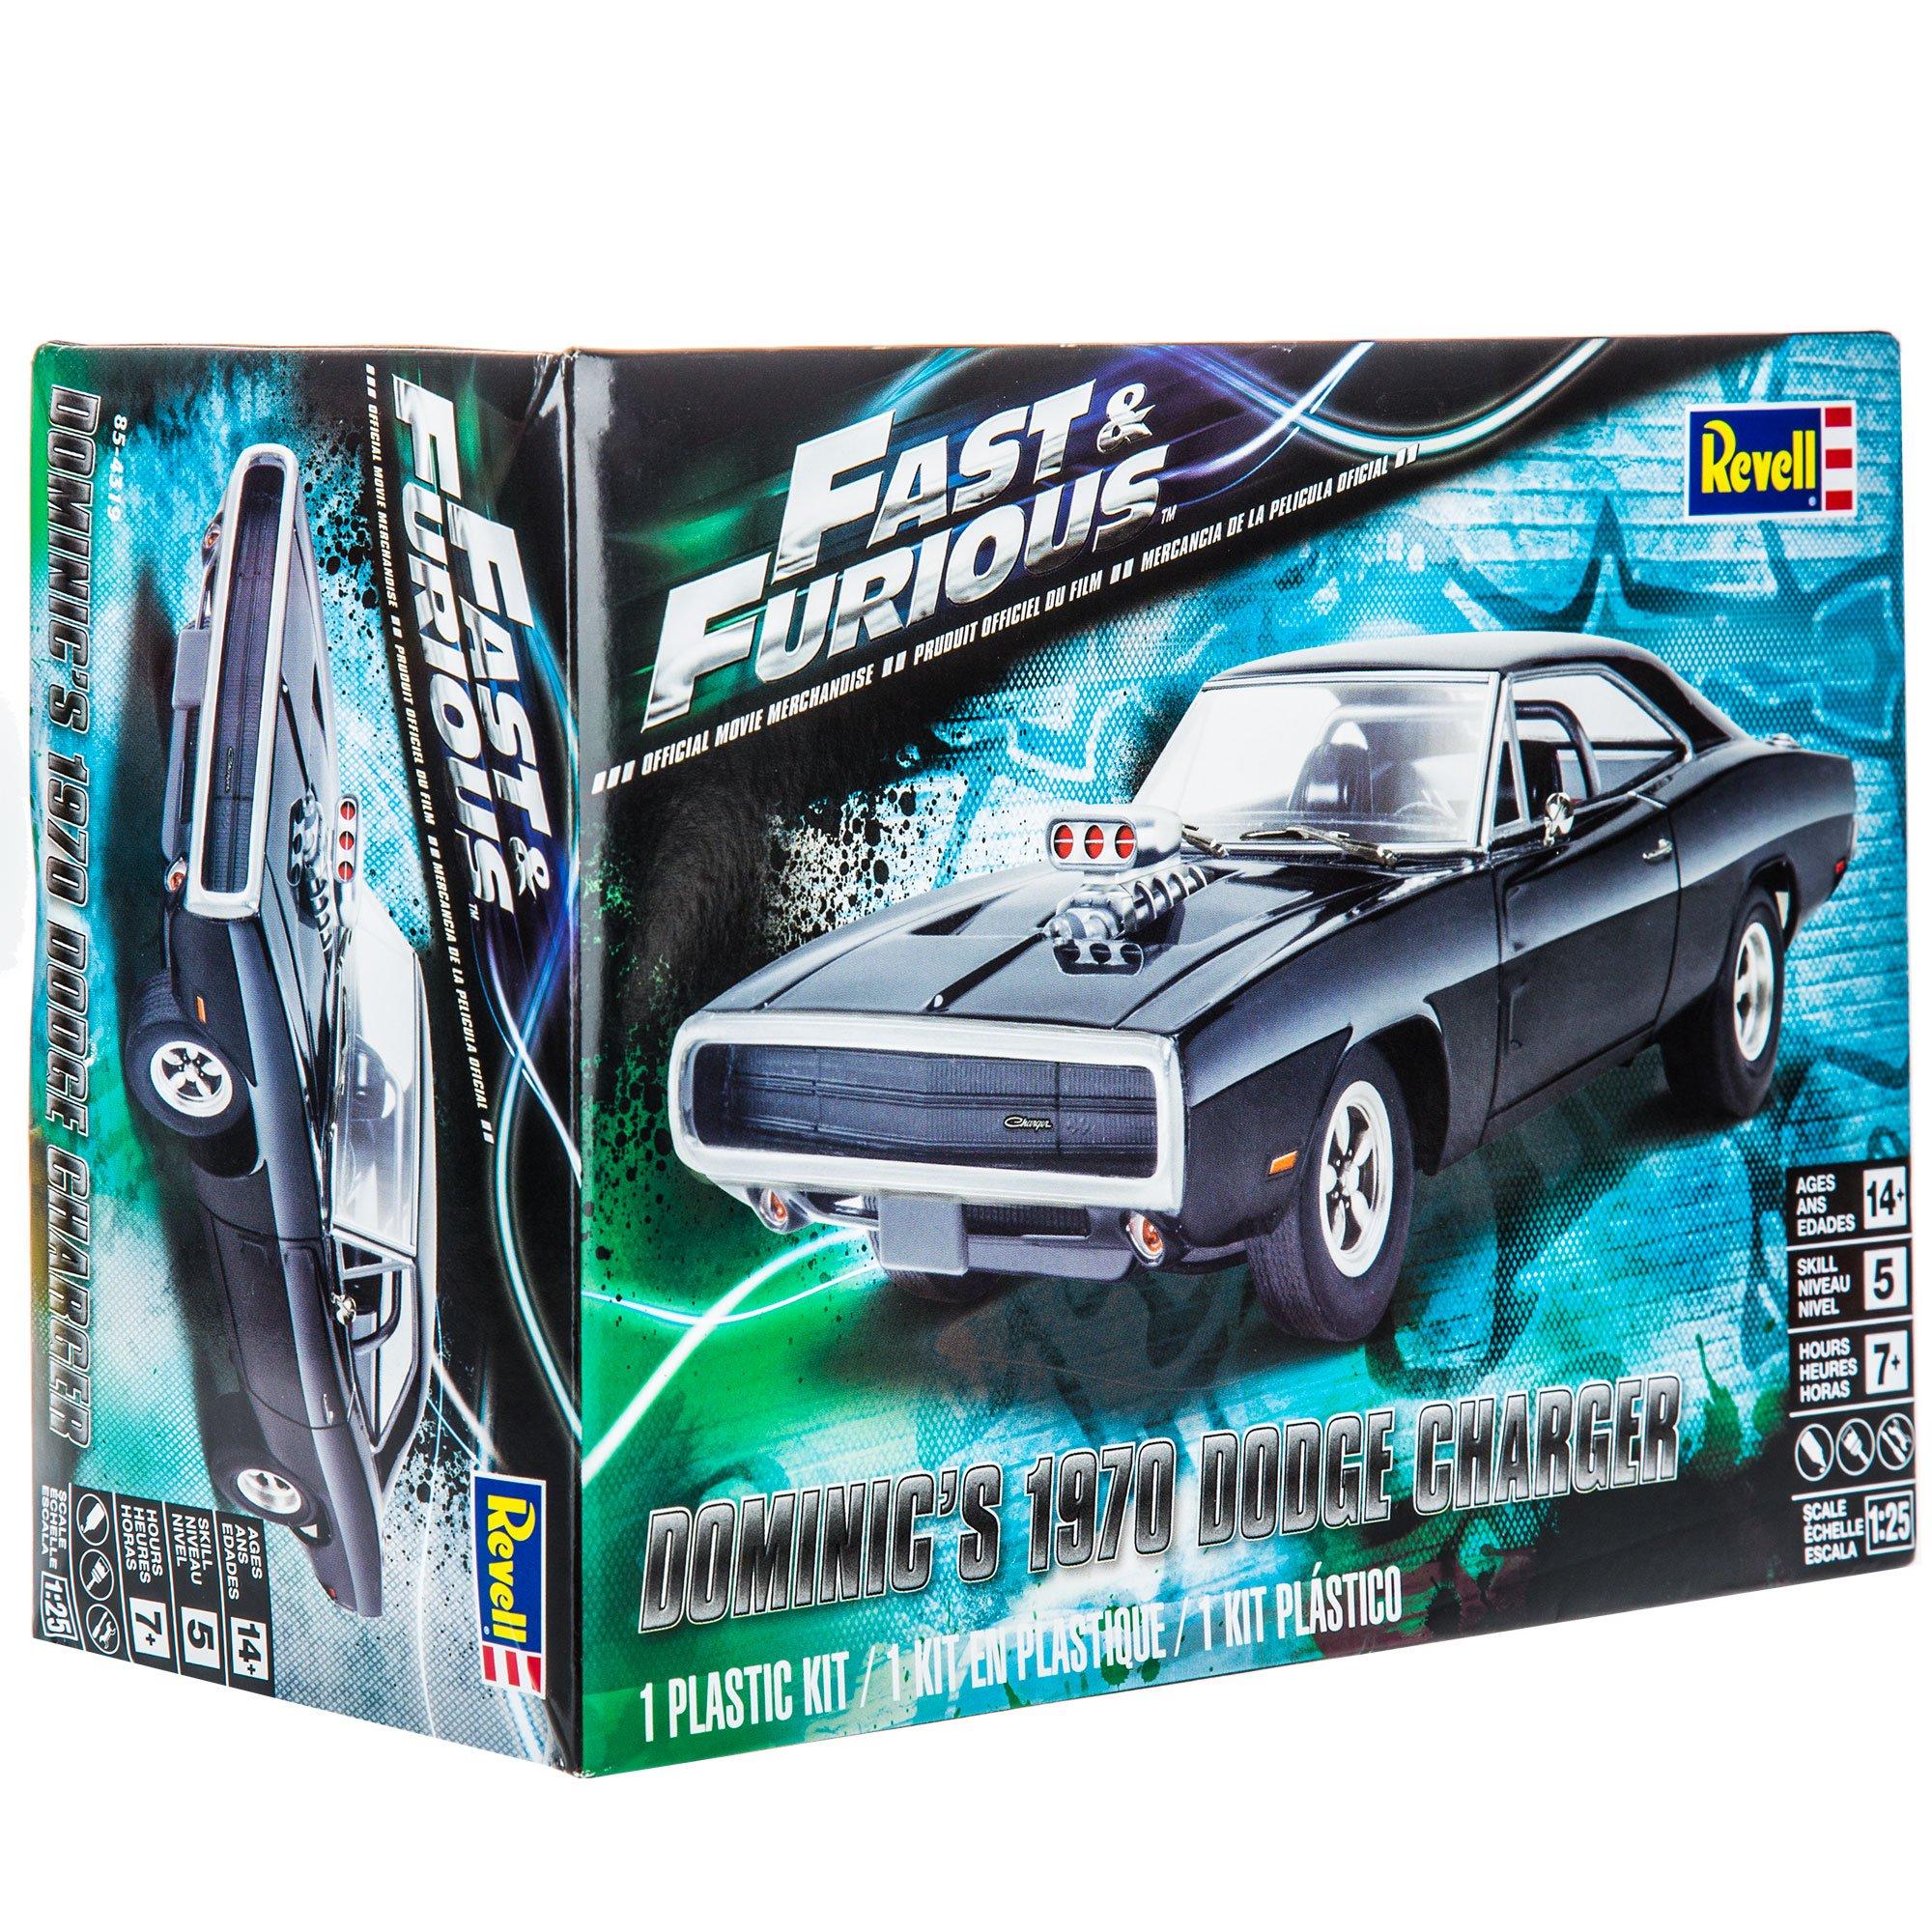 Revell-07693 Fast & Furious-Dominics 1970 Dodge Charger Fast and